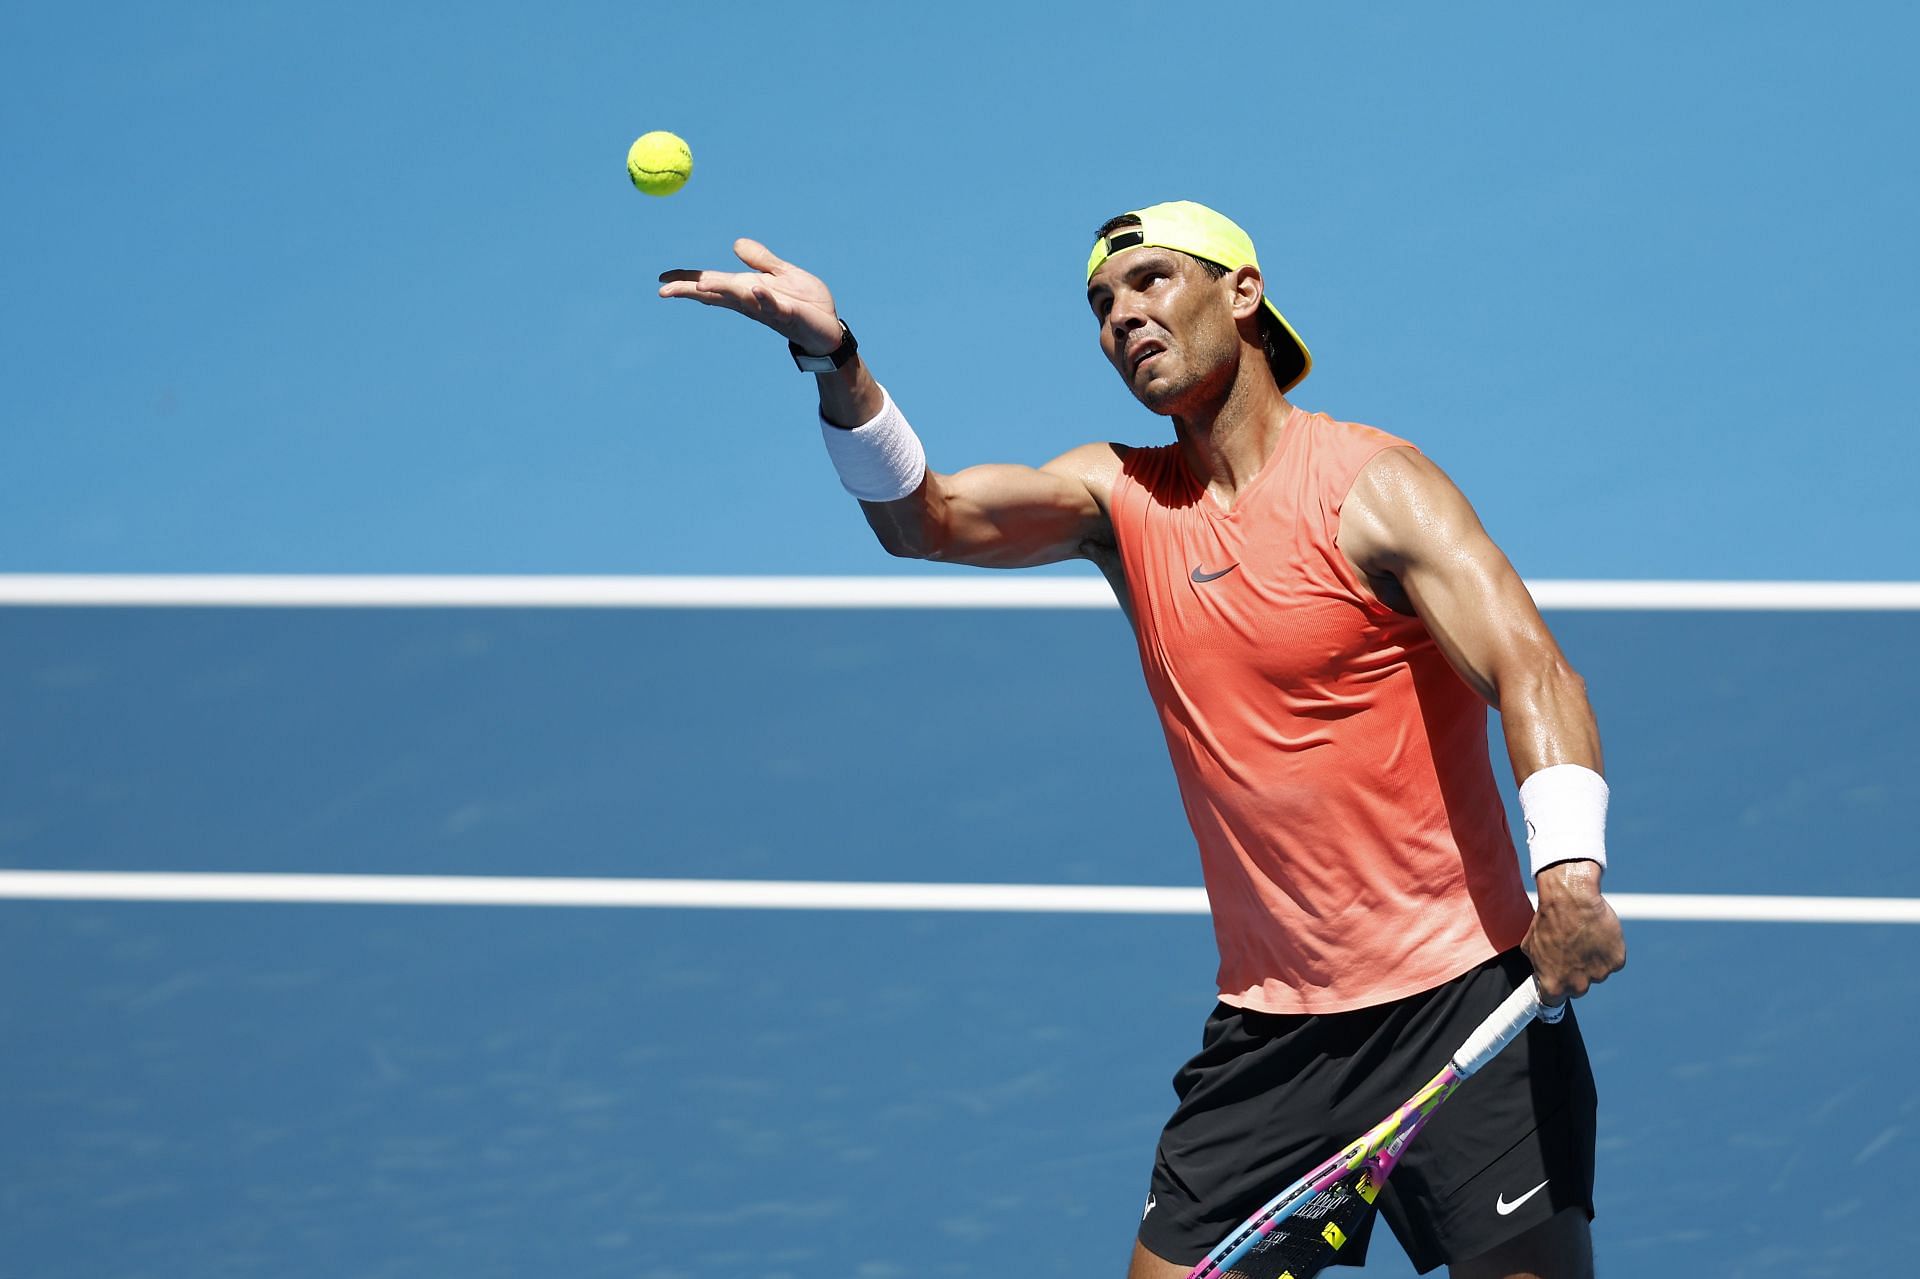 Rafael Nadal in a training session ahead of the 2023 Australian Open.